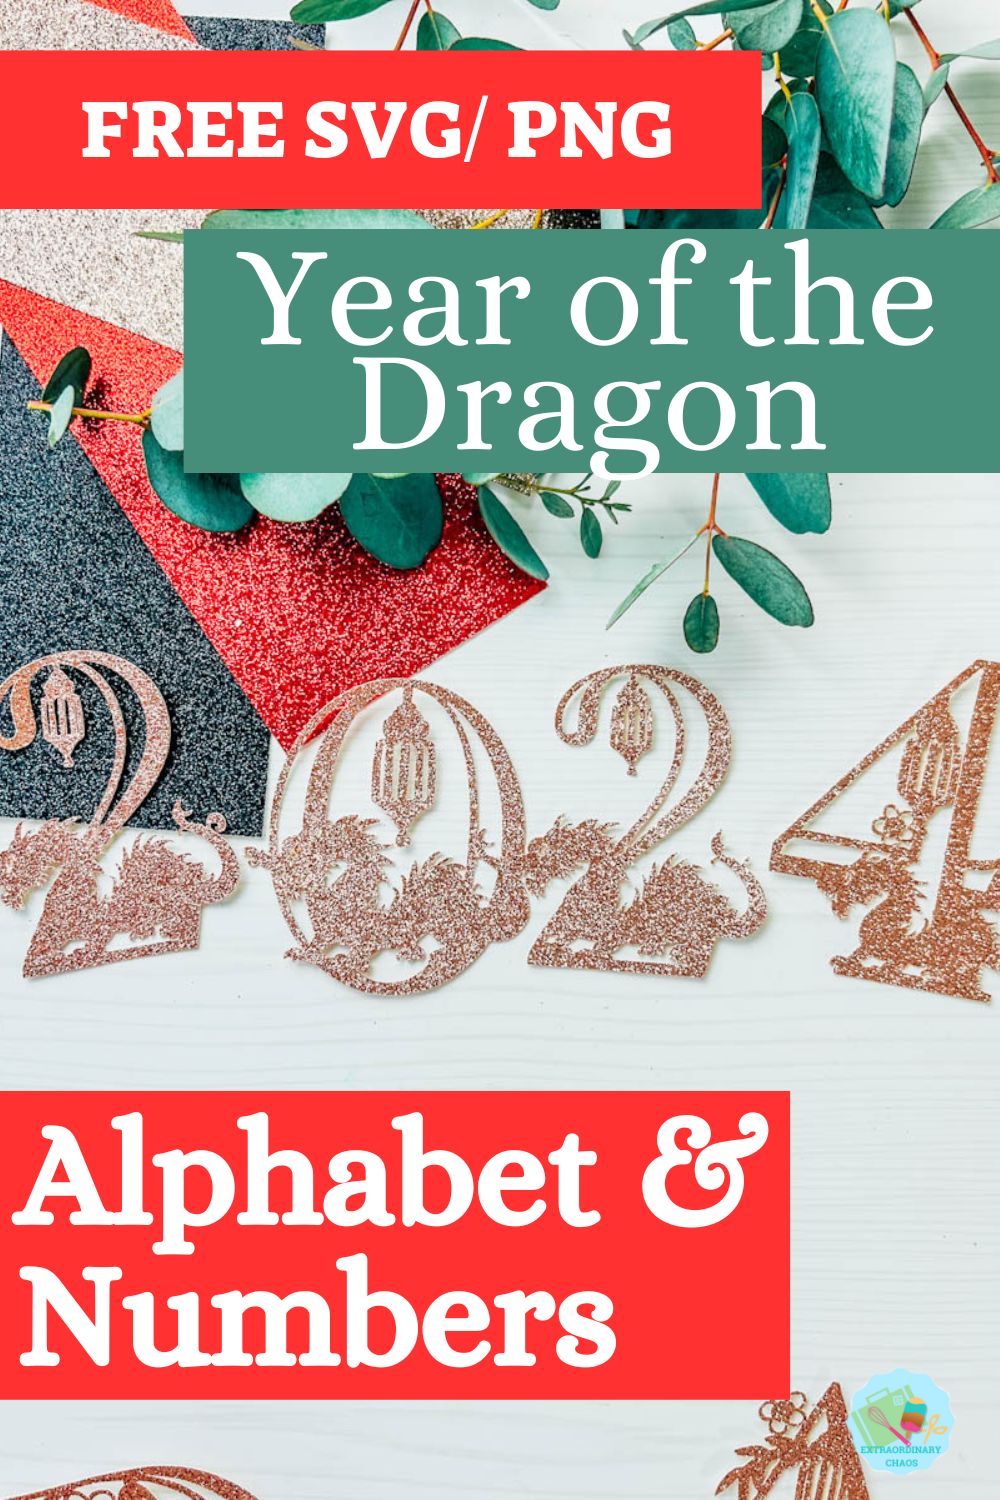 Free SVG PNG Chinese New Year, Year of the Dragon Alphabet letters and numbers for Cricut and Silhouette